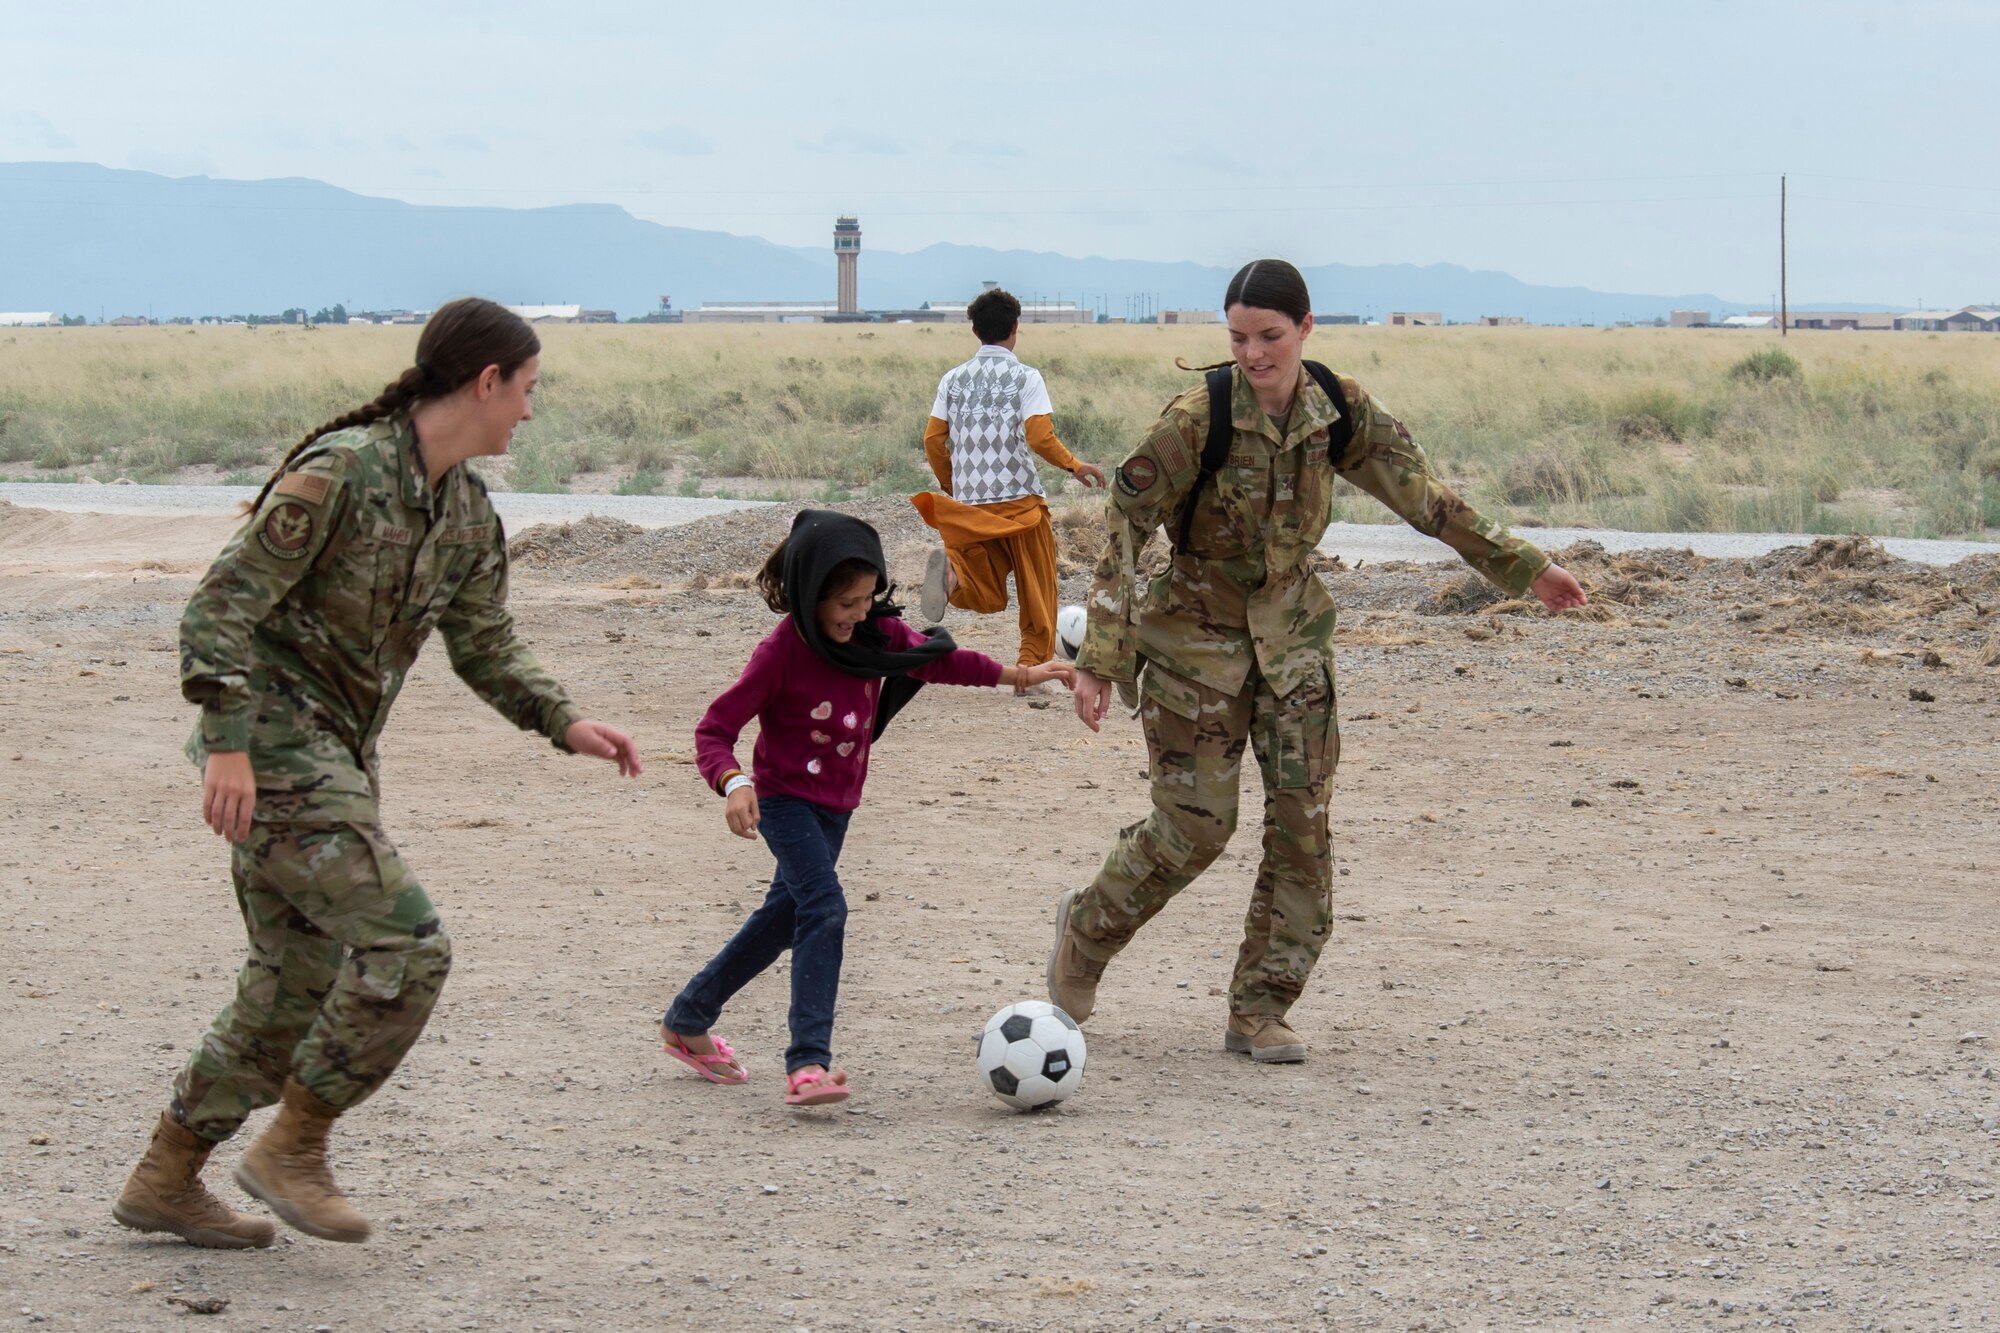 Airmen from Task Force-Holloman play soccer with an Afghan evacuee at the Afghan personnel camp on Holloman Air Force Base, New Mexico, Aug. 31, 2021. The Department of Defense, through U.S. Northern Command, and in support of the Department of State and Department of Homeland Security, is providing transportation, temporary housing, medical screening, and general support for up to 50,000 Afghan evacuees at suitable facilities, in permanent or temporary structures, as quickly as possible. This initiative provides Afghan evacuees essential support at secure locations outside Afghanistan. (U.S. Air Force photo by Staff Sgt. Kenneth Boyton)